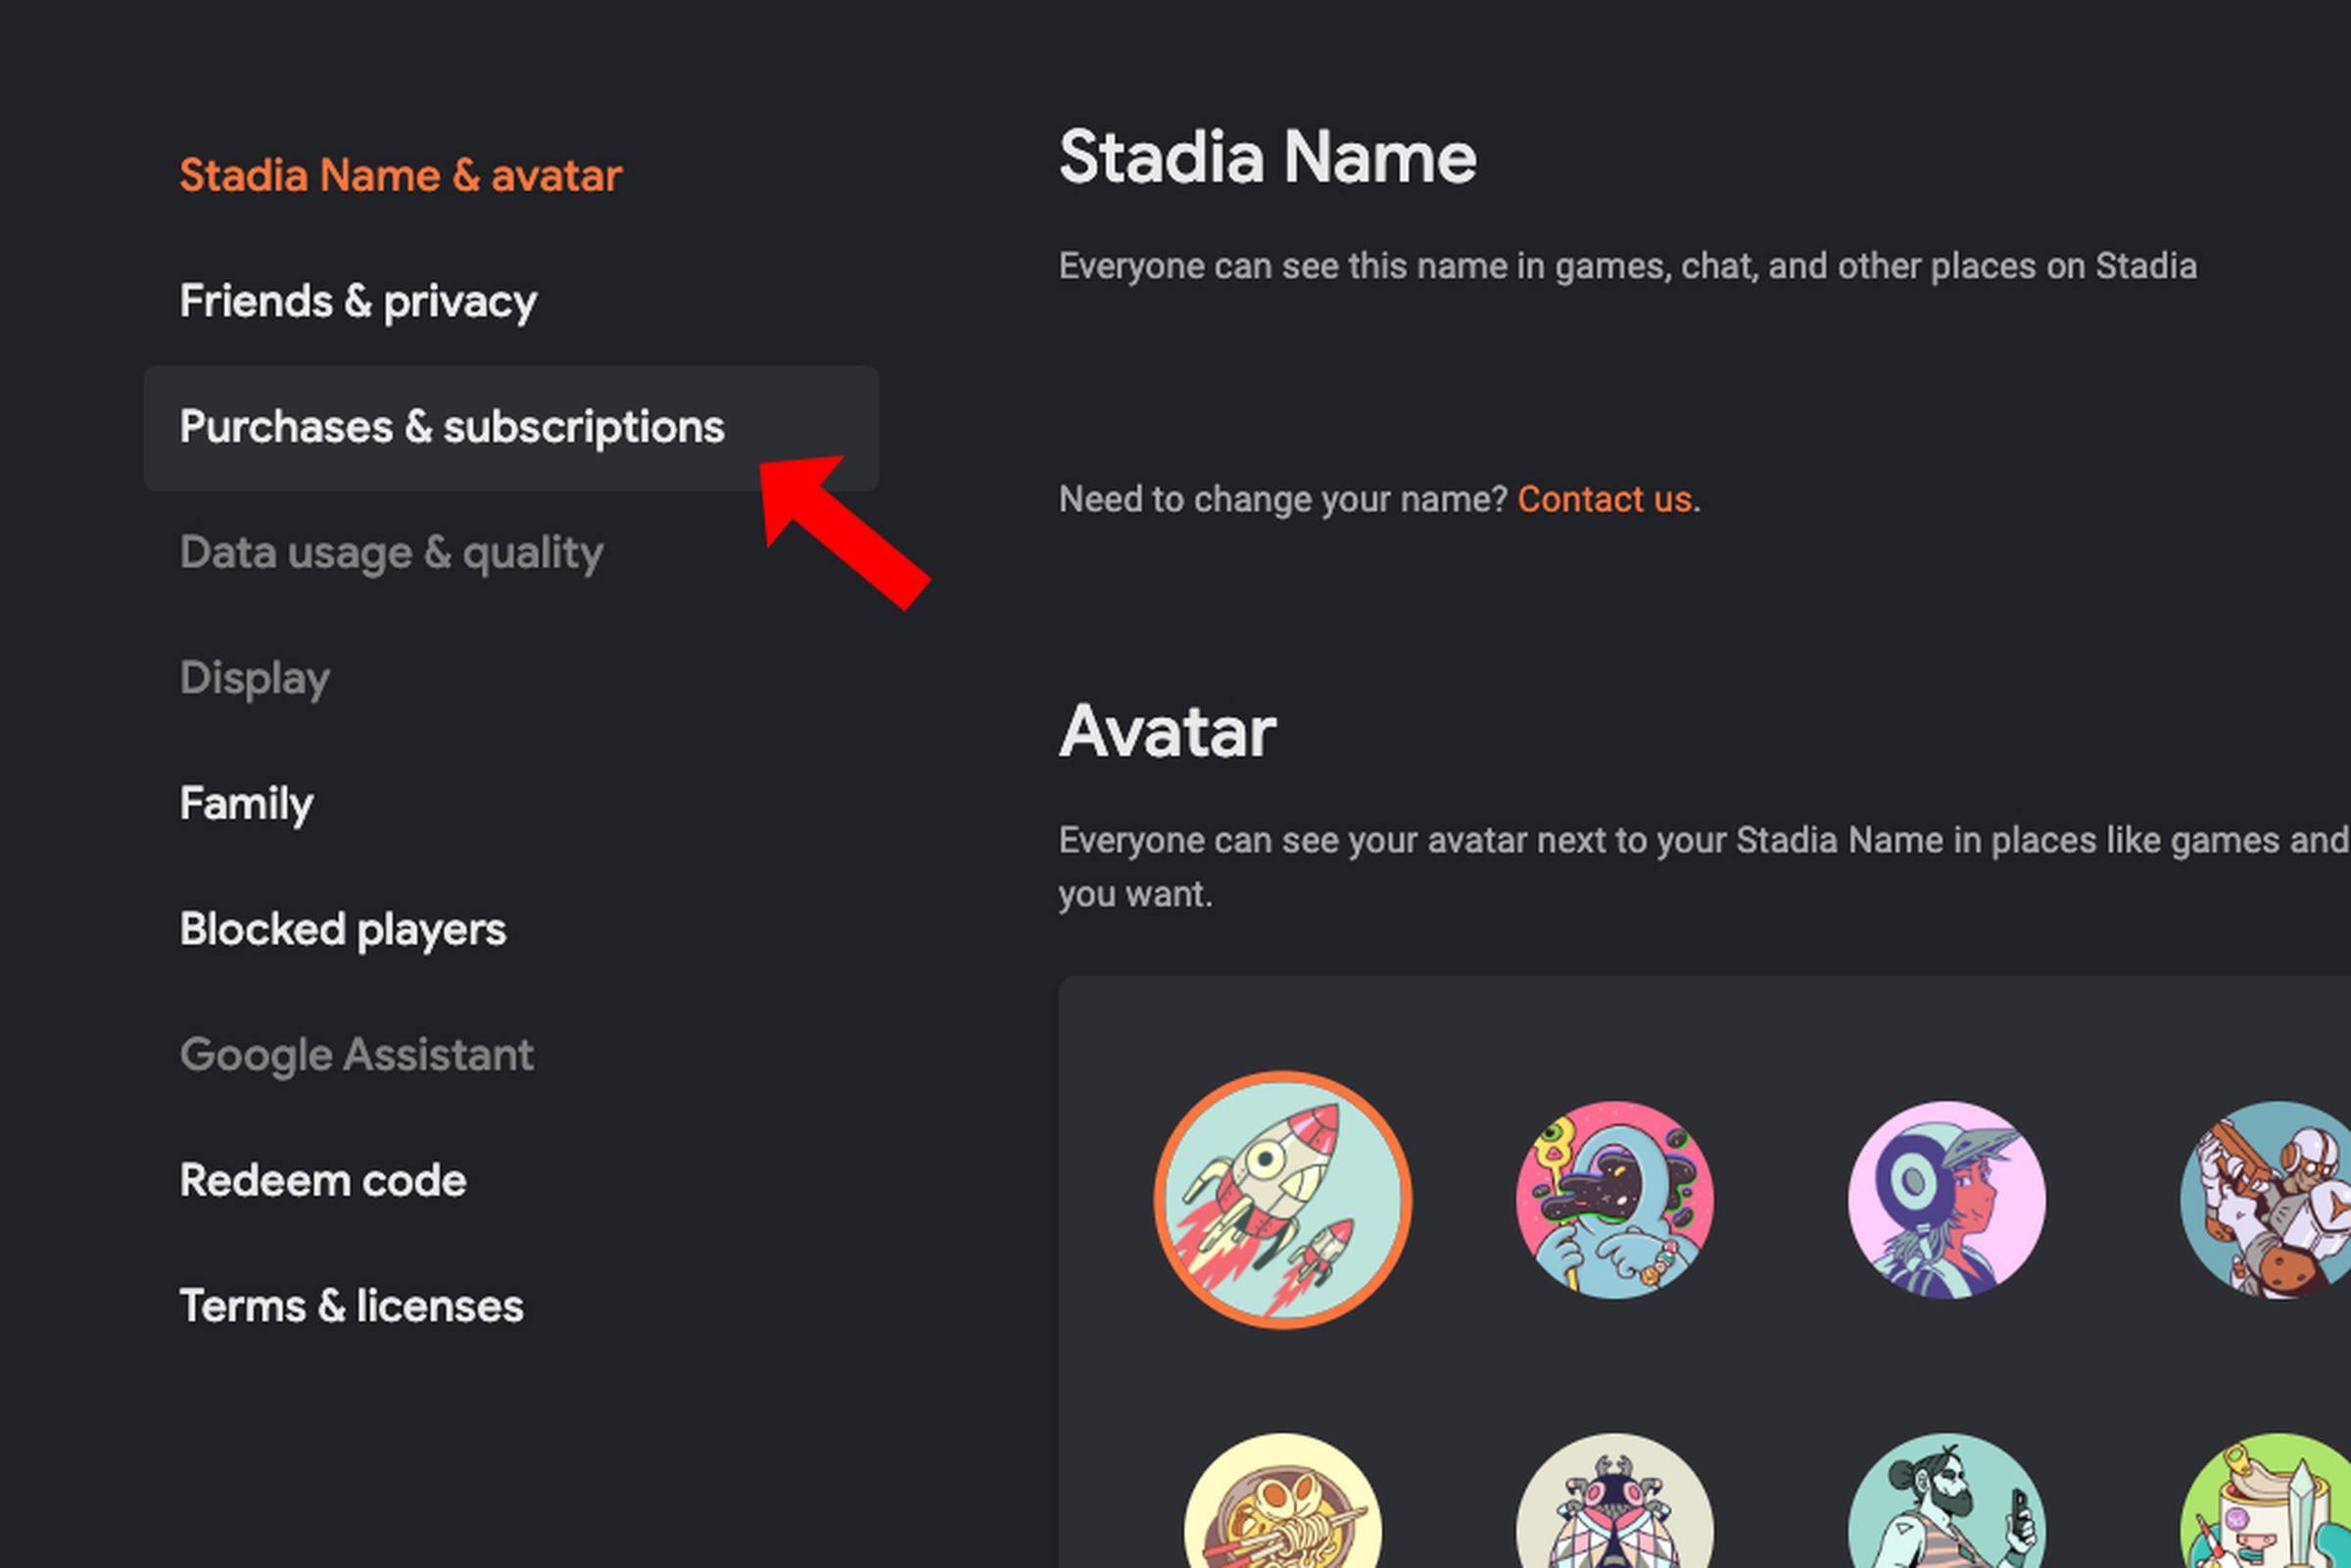 Purchases & subscriptions lists all your Stadia purchasing history and current subscription status.